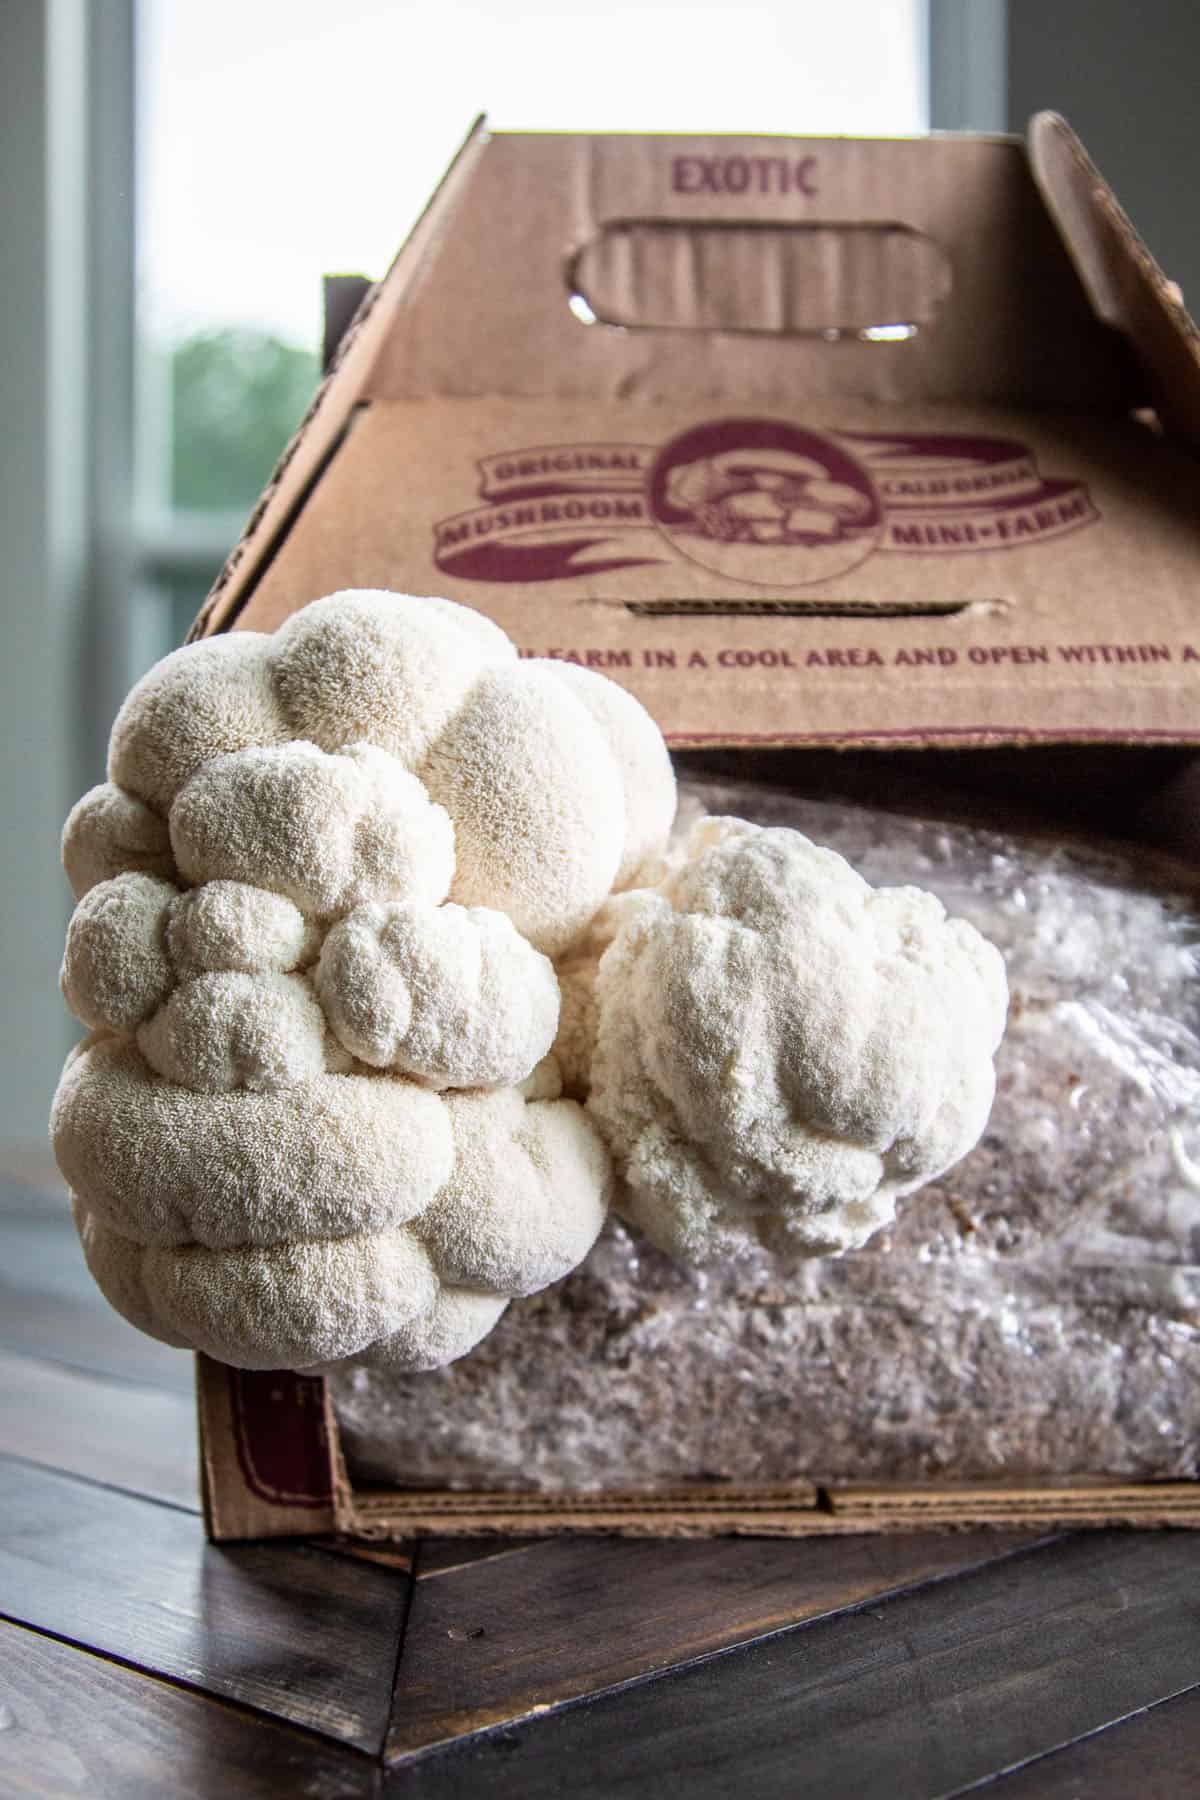 Lion's Mane mushrooms growing from a grow kit.